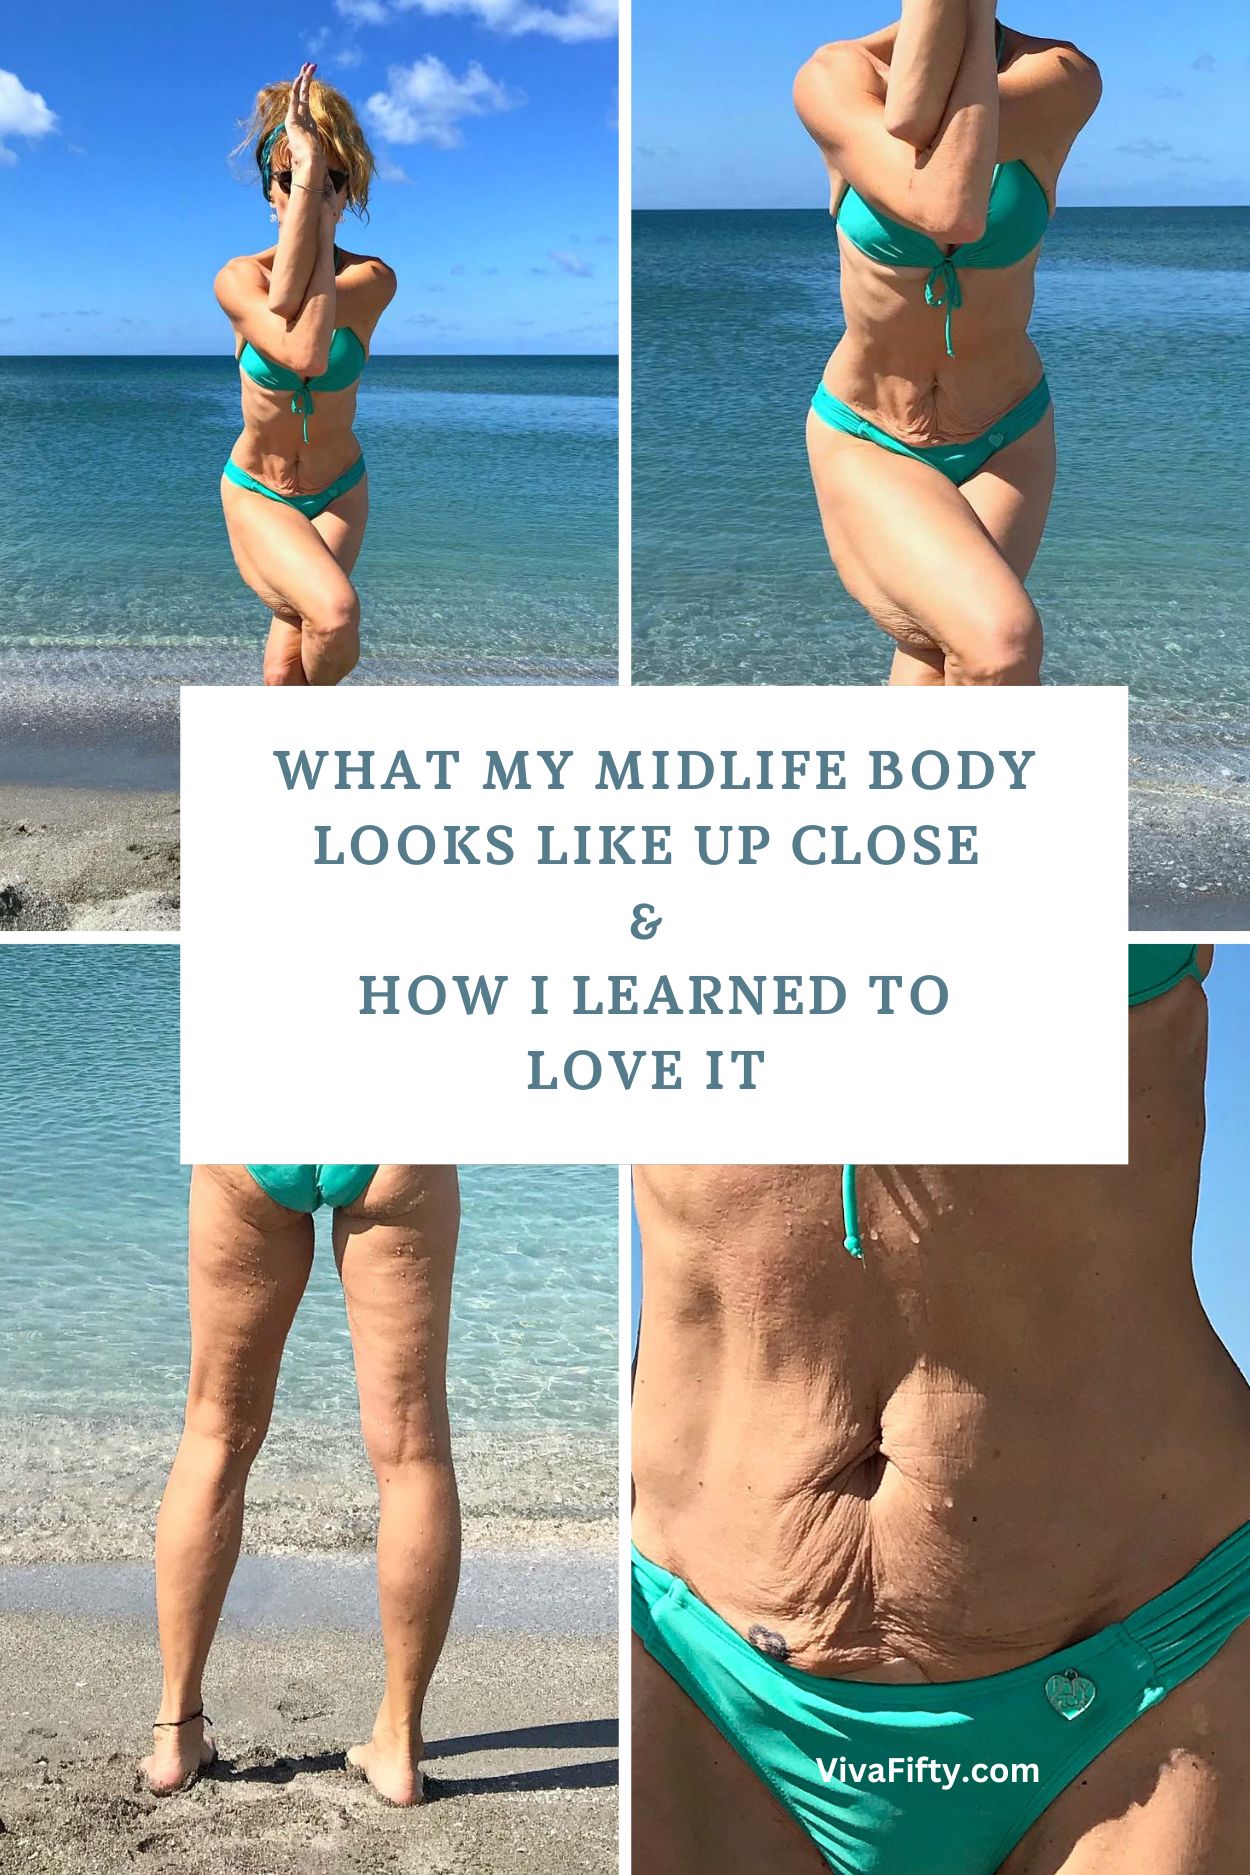 Most articles about loving your midlife body don´t actually show a mature or aging body, so here are some photos to help you realize you´re not alone.